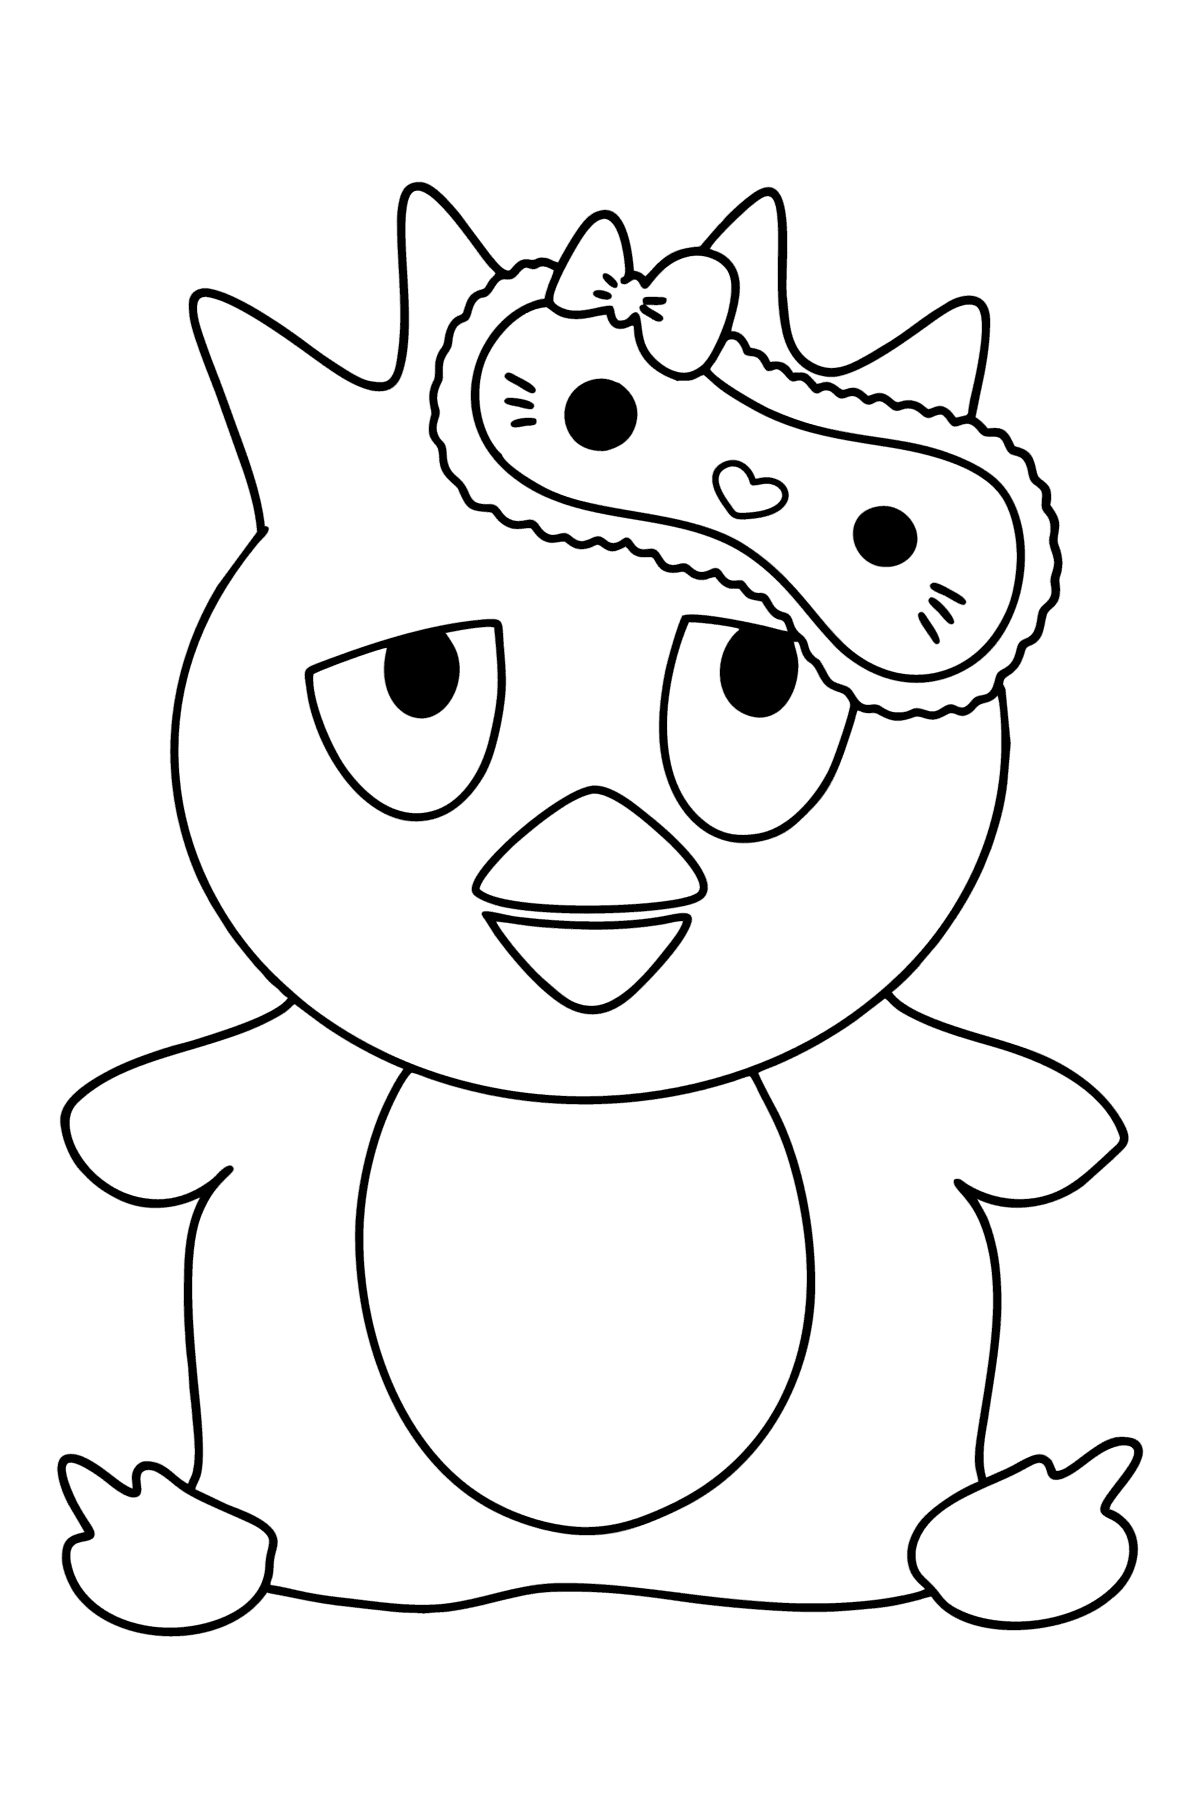 Hello Kitty Badtz Maru coloring page - Coloring Pages for Kids